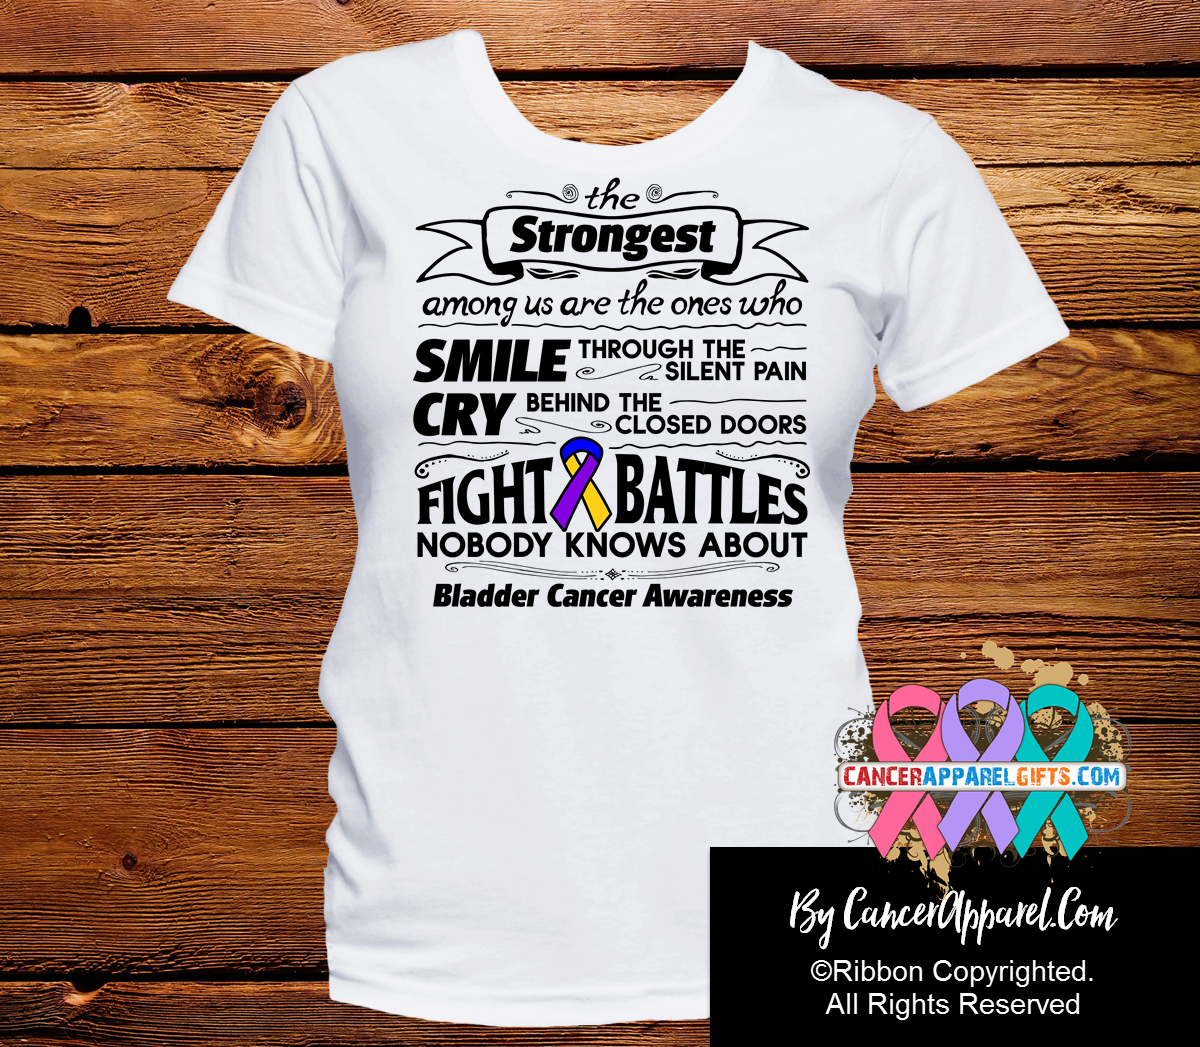 Bladder Cancer The Strongest Among Us Shirts - Cancer Apparel and Gifts